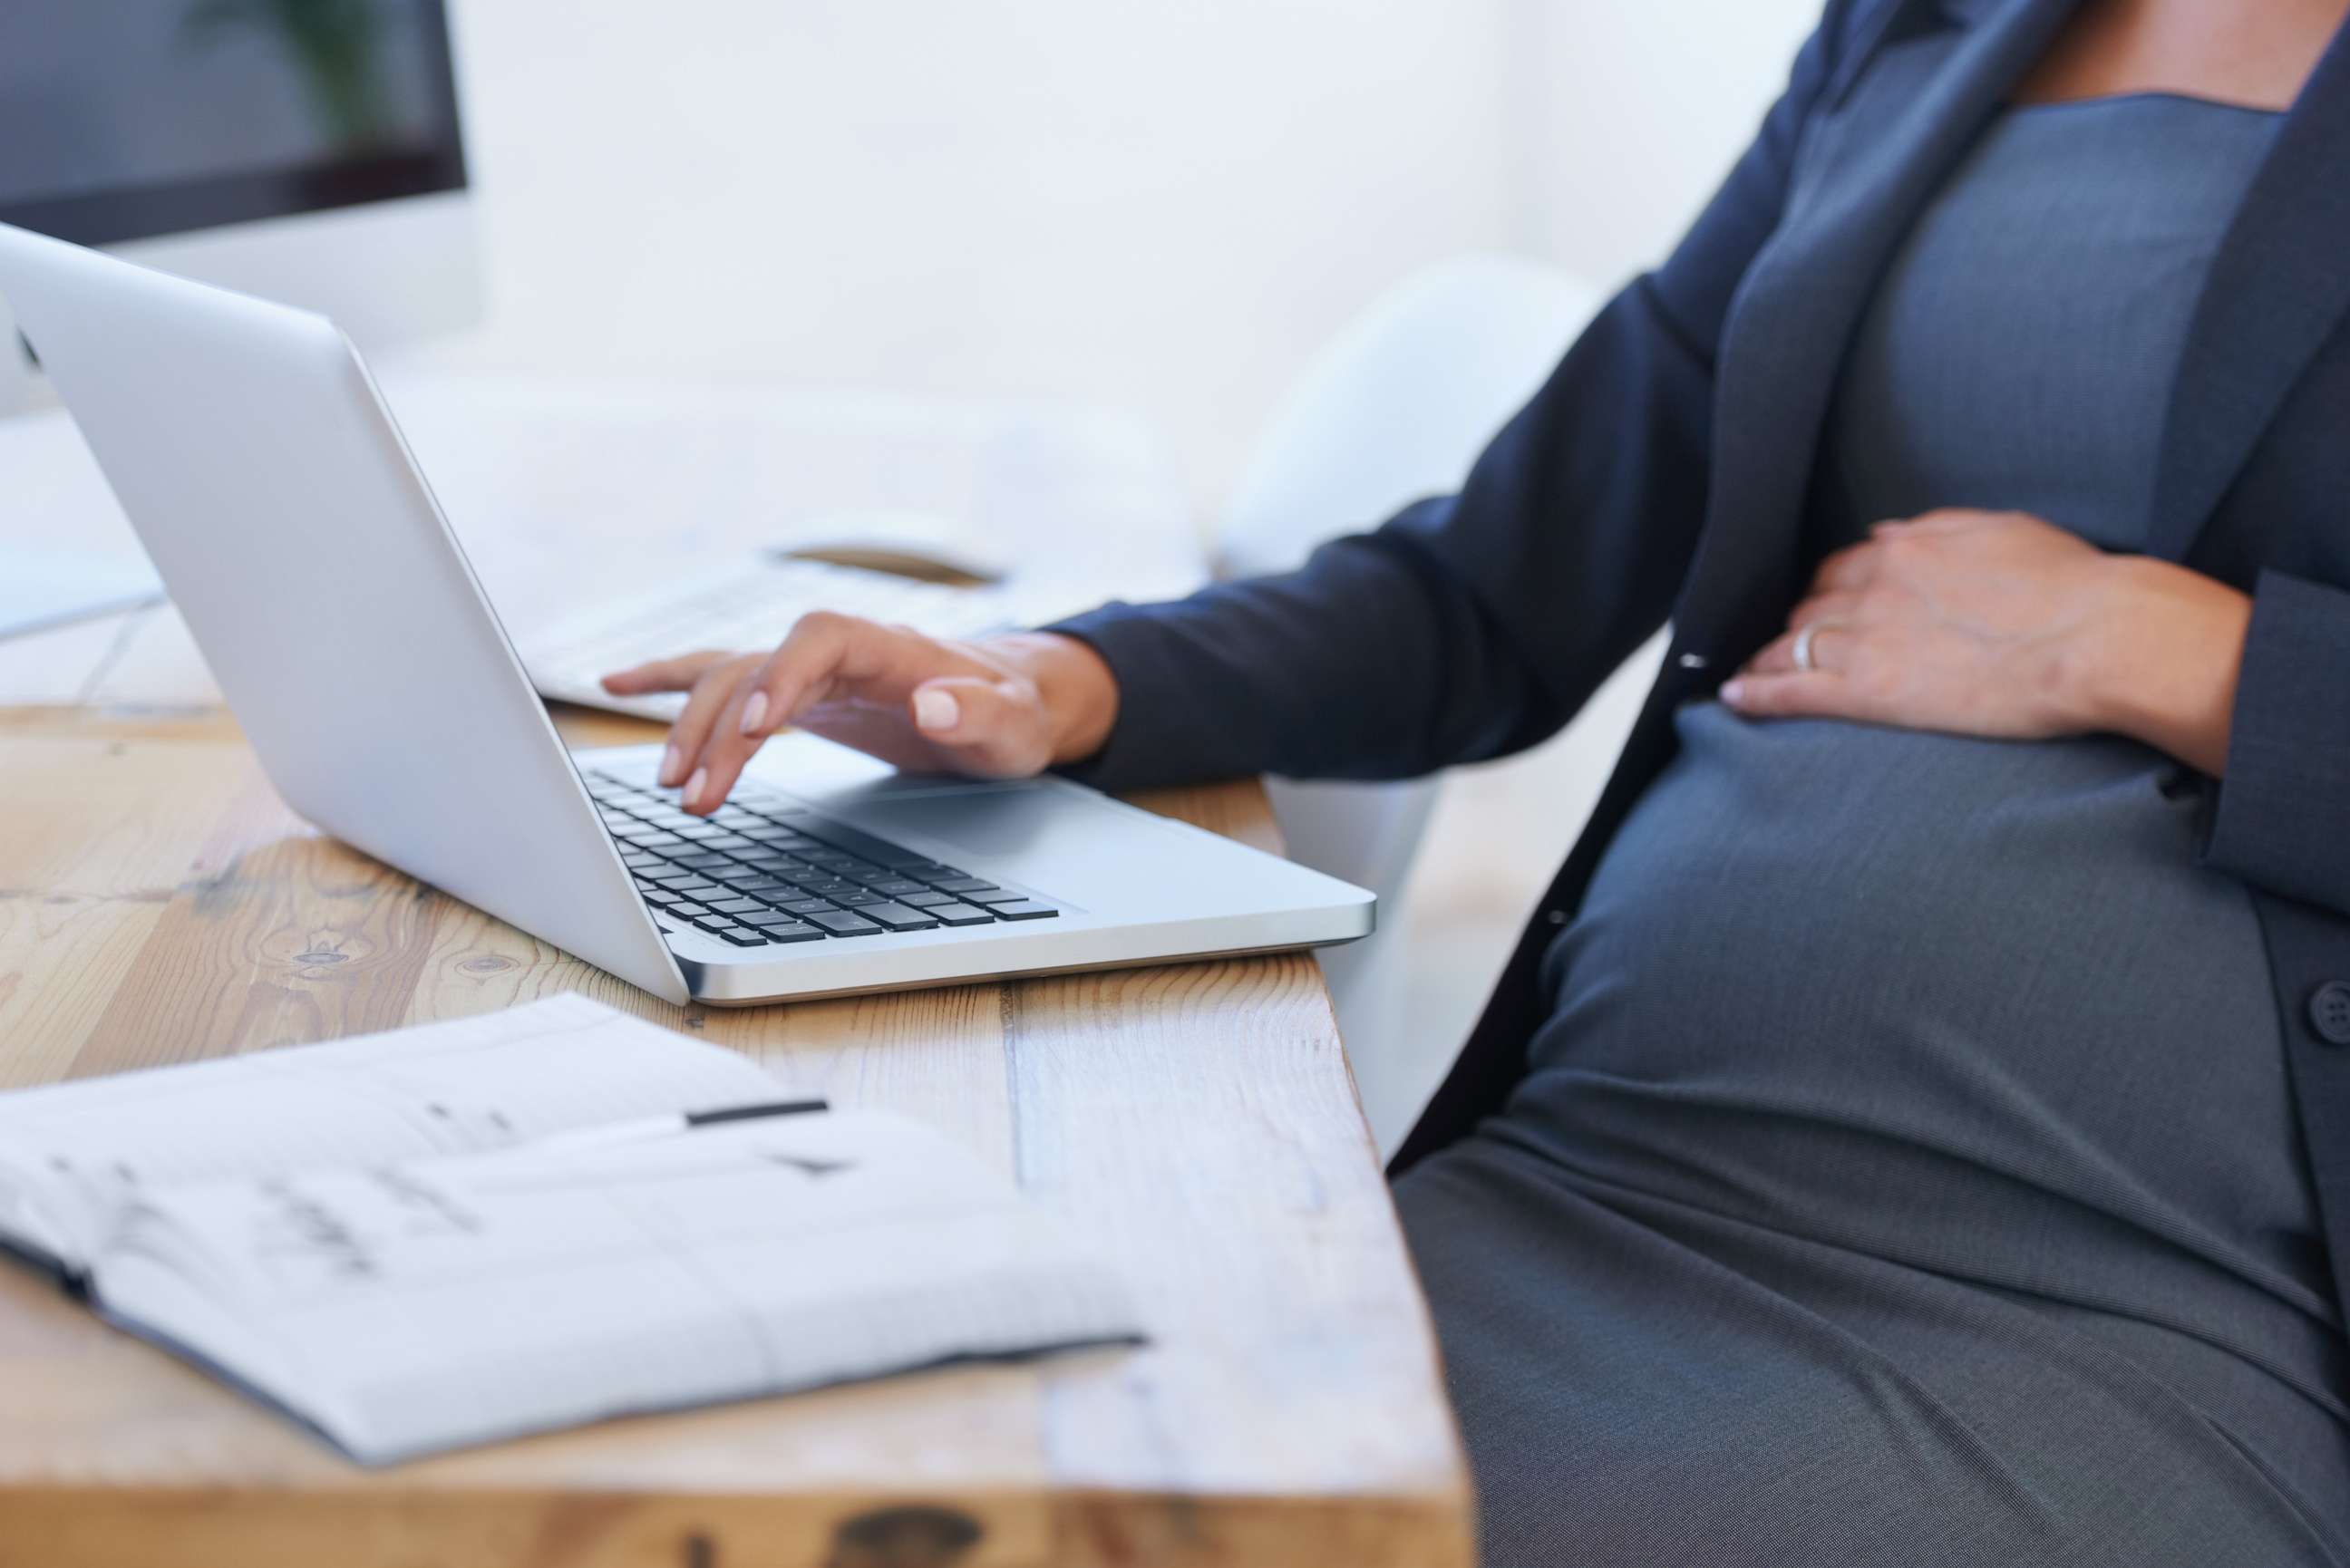 PHOTO: A pregnant woman works on her laptop in an office.